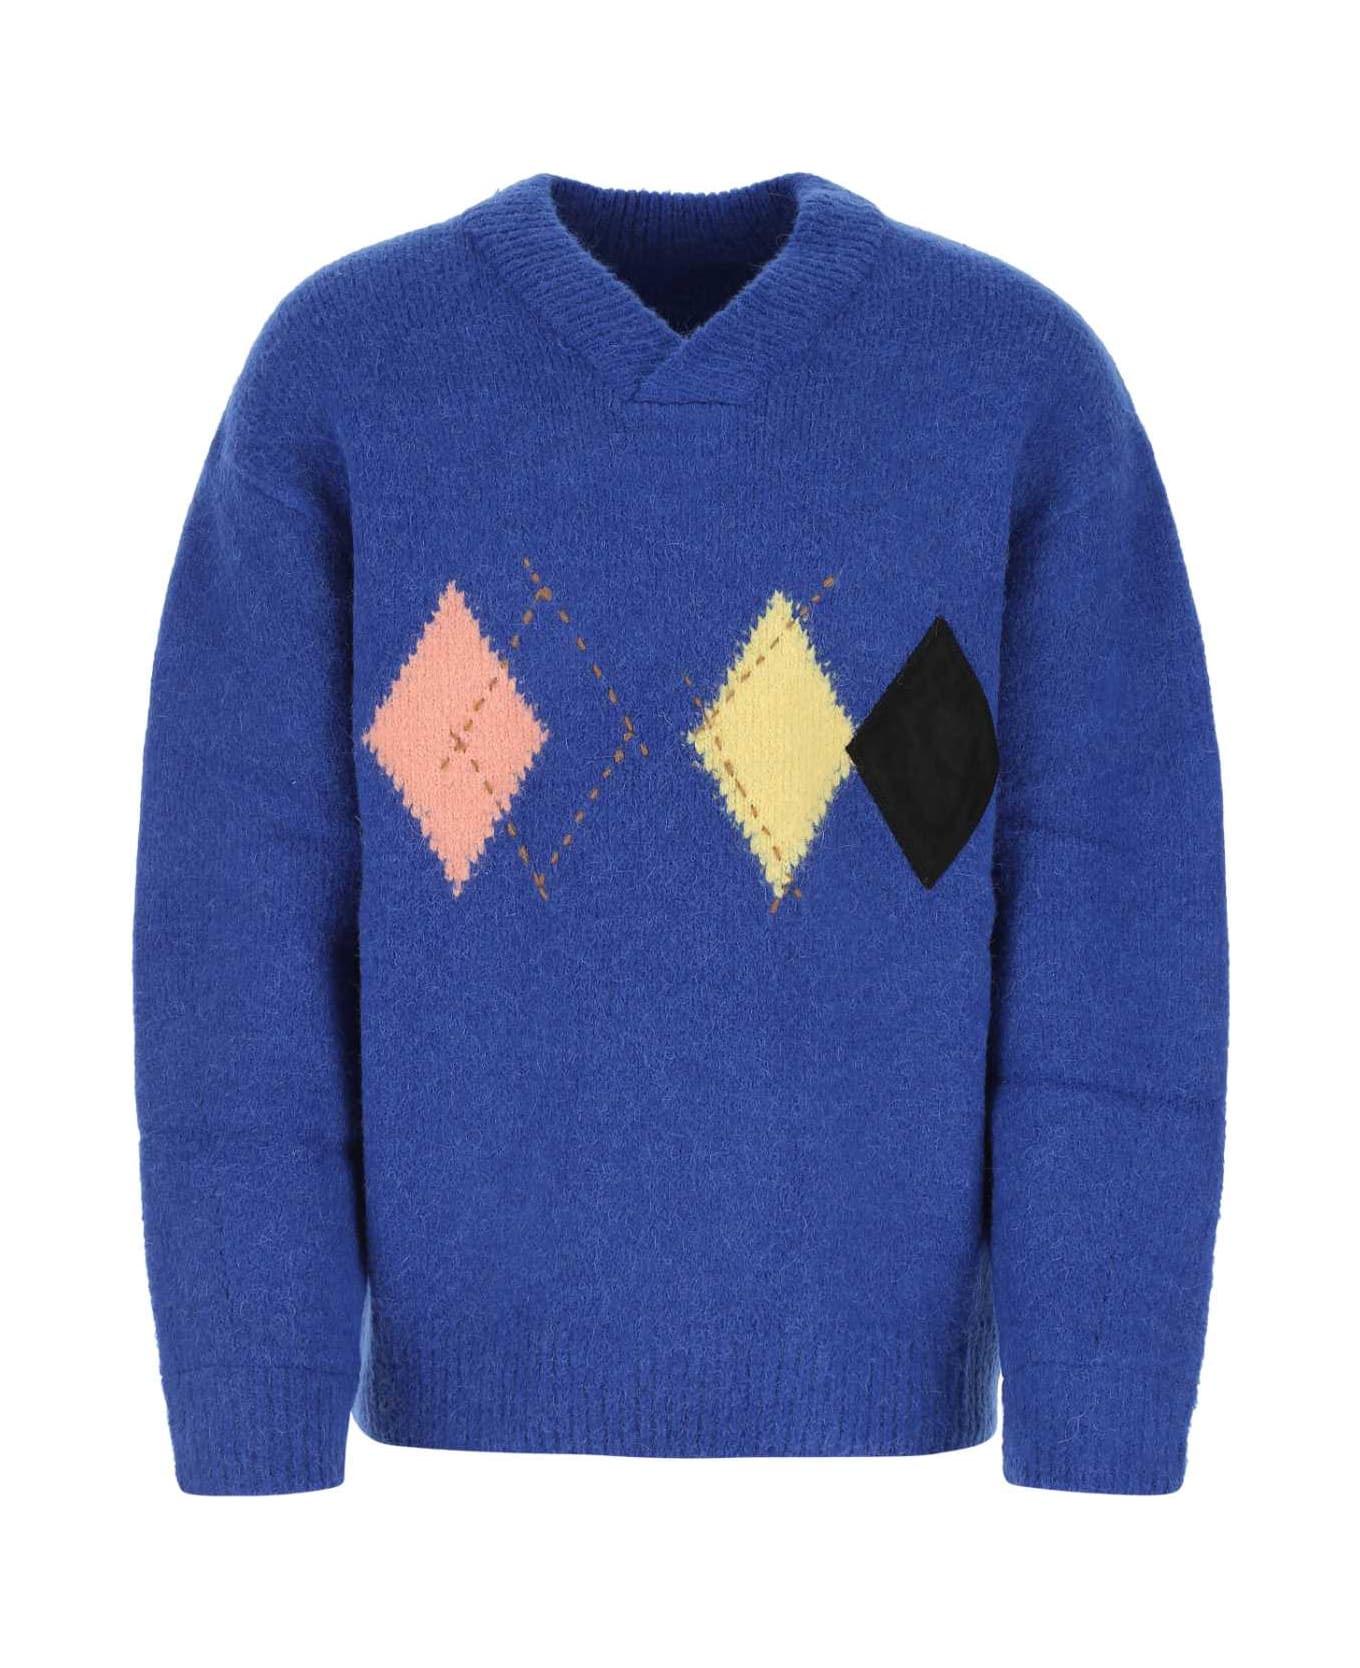 Ader Error Electric Blue Acrylic Blend Sweater - BLUE